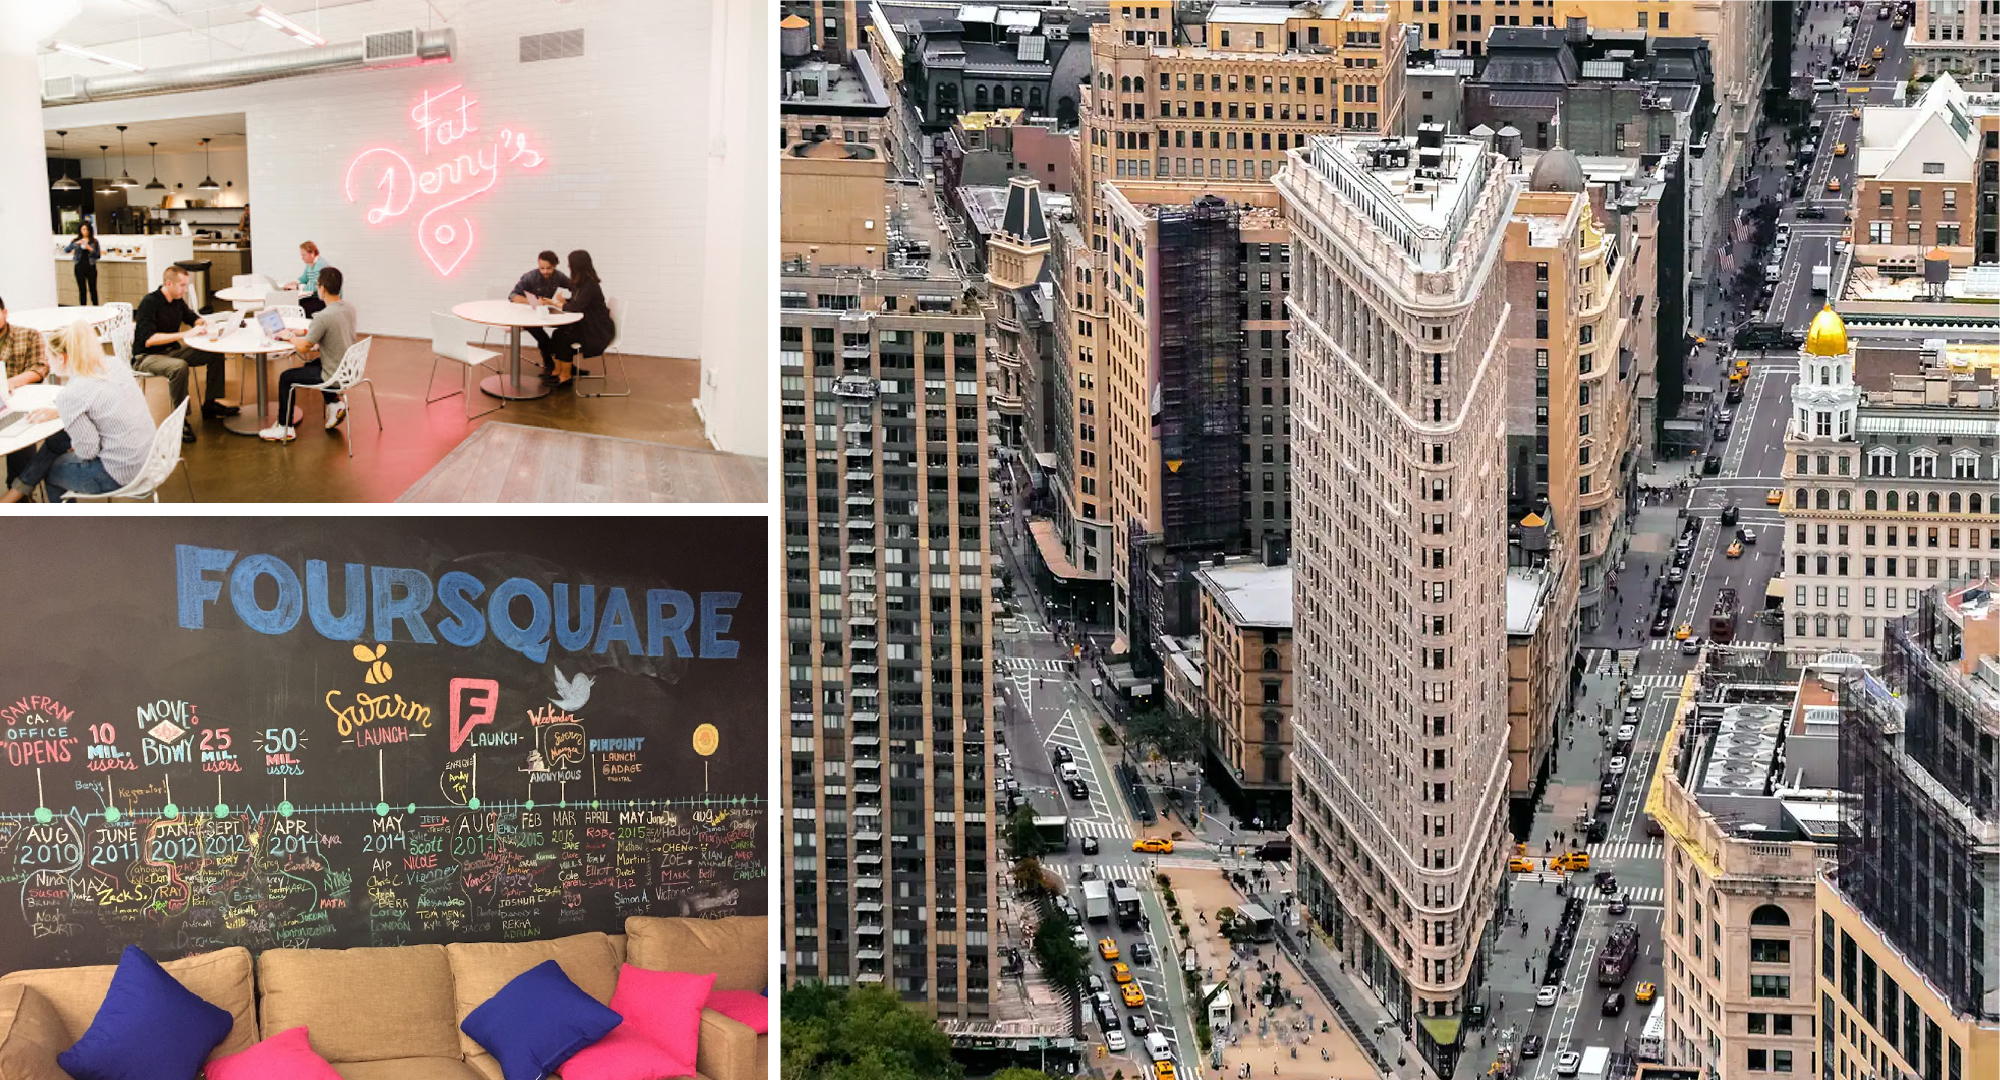 New York and Foursquare's office